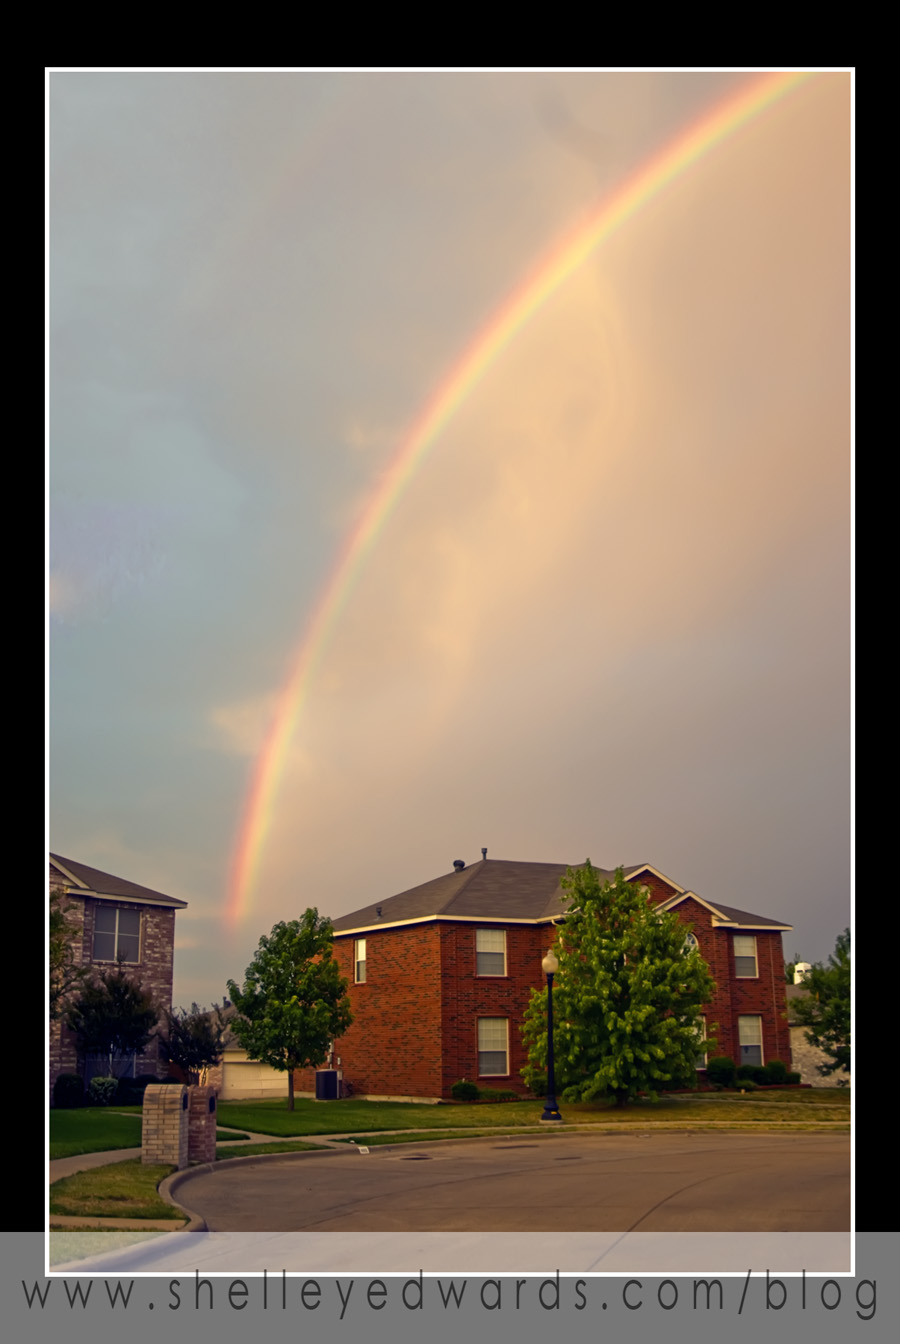 Rainbow after an August Storm - view from my house